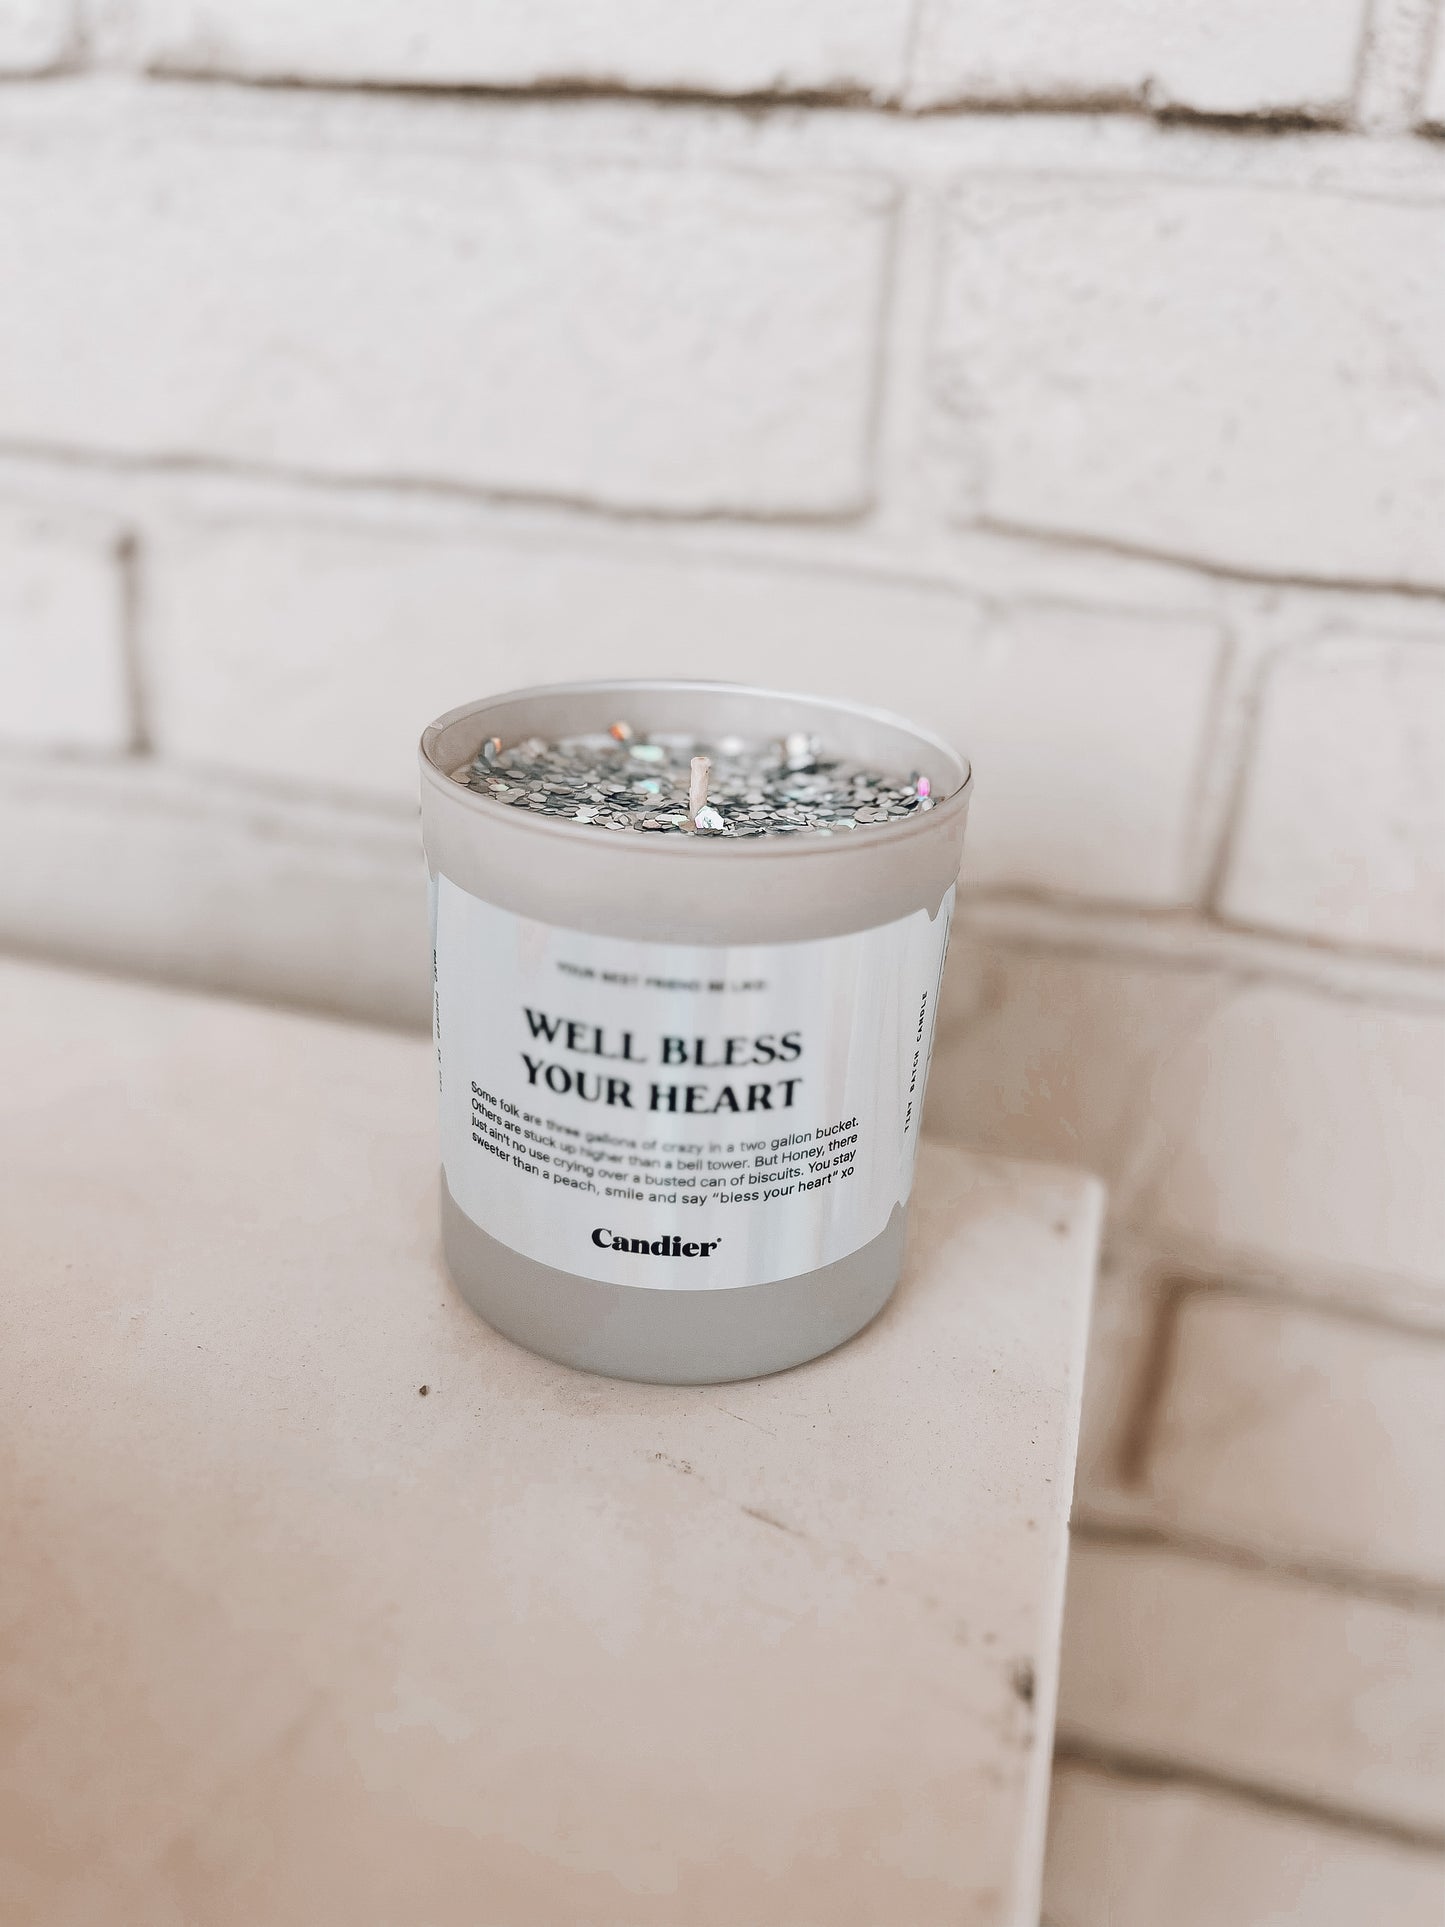 Bless Your Heart Candle | CANDIER